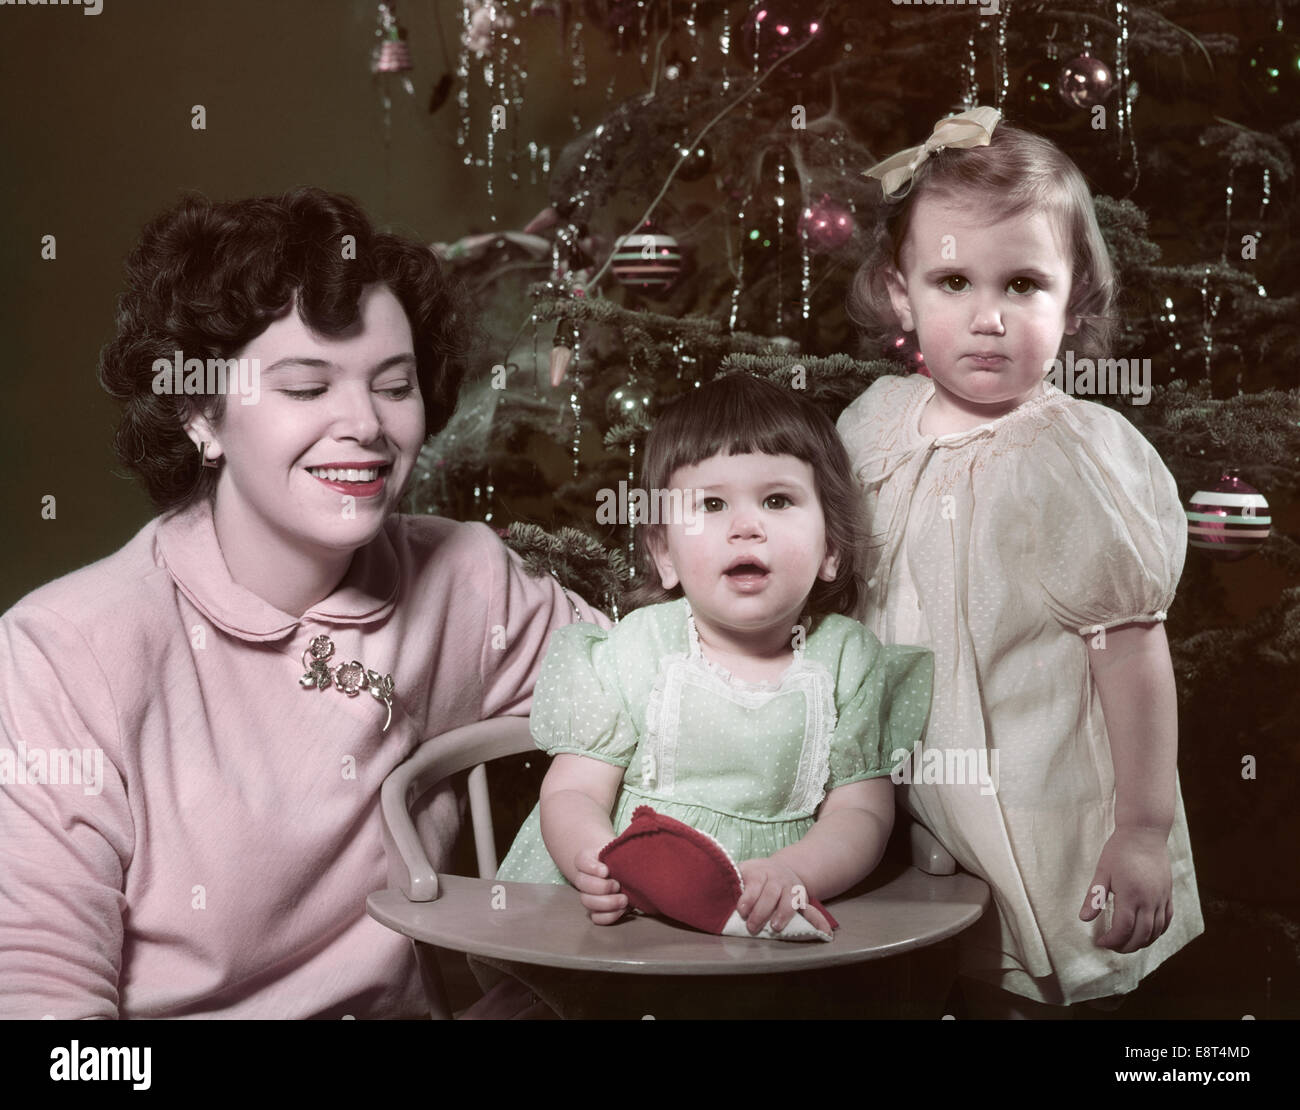 1950s PORTRAIT SMILING MOTHER TWO CHILDREN GIRLS BY CHRISTMAS TREE Stock Photo